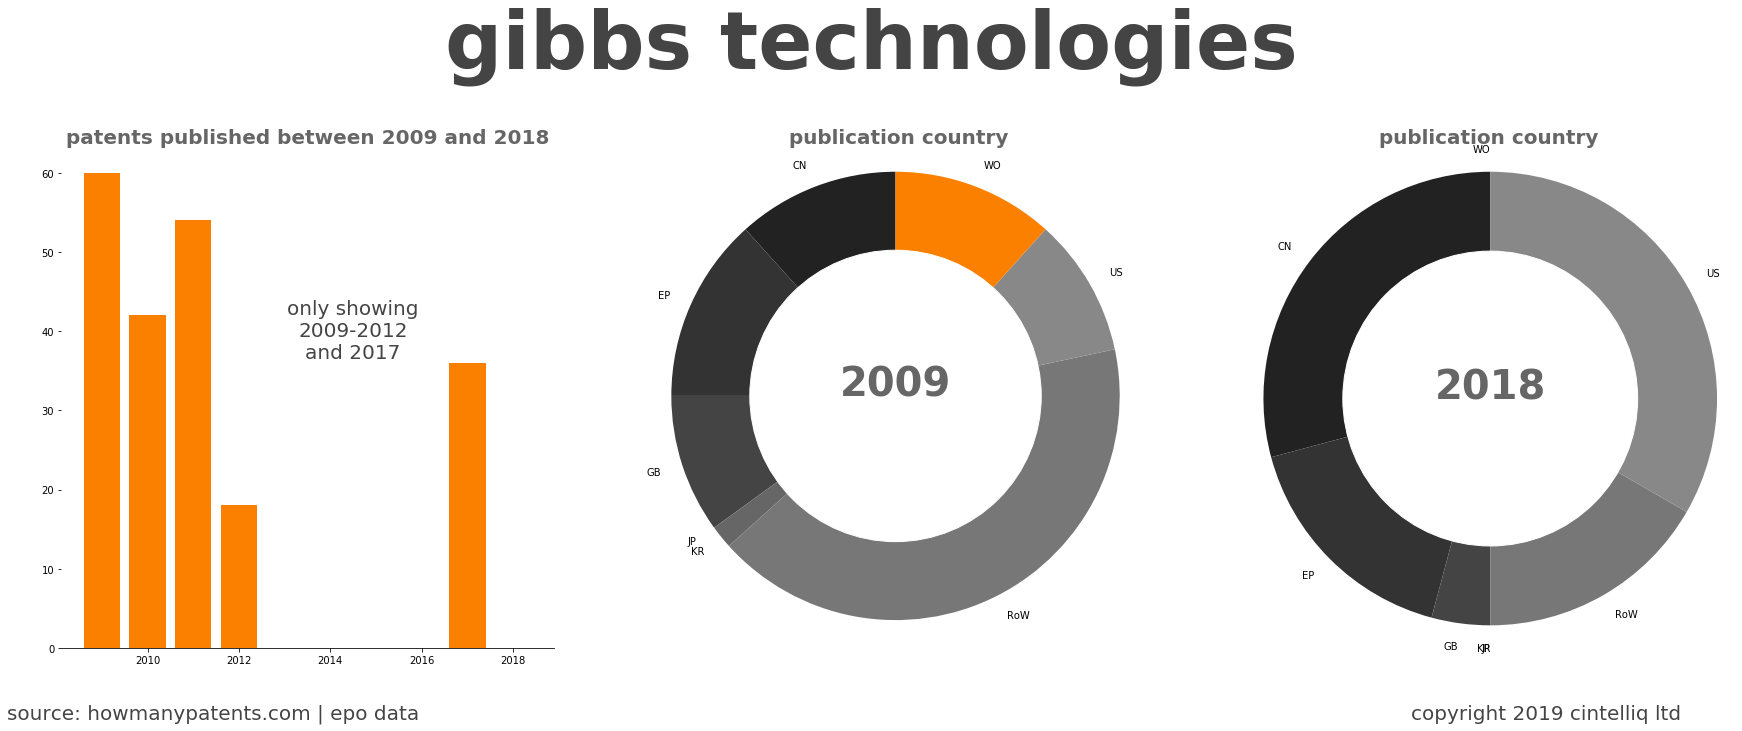 summary of patents for Gibbs Technologies